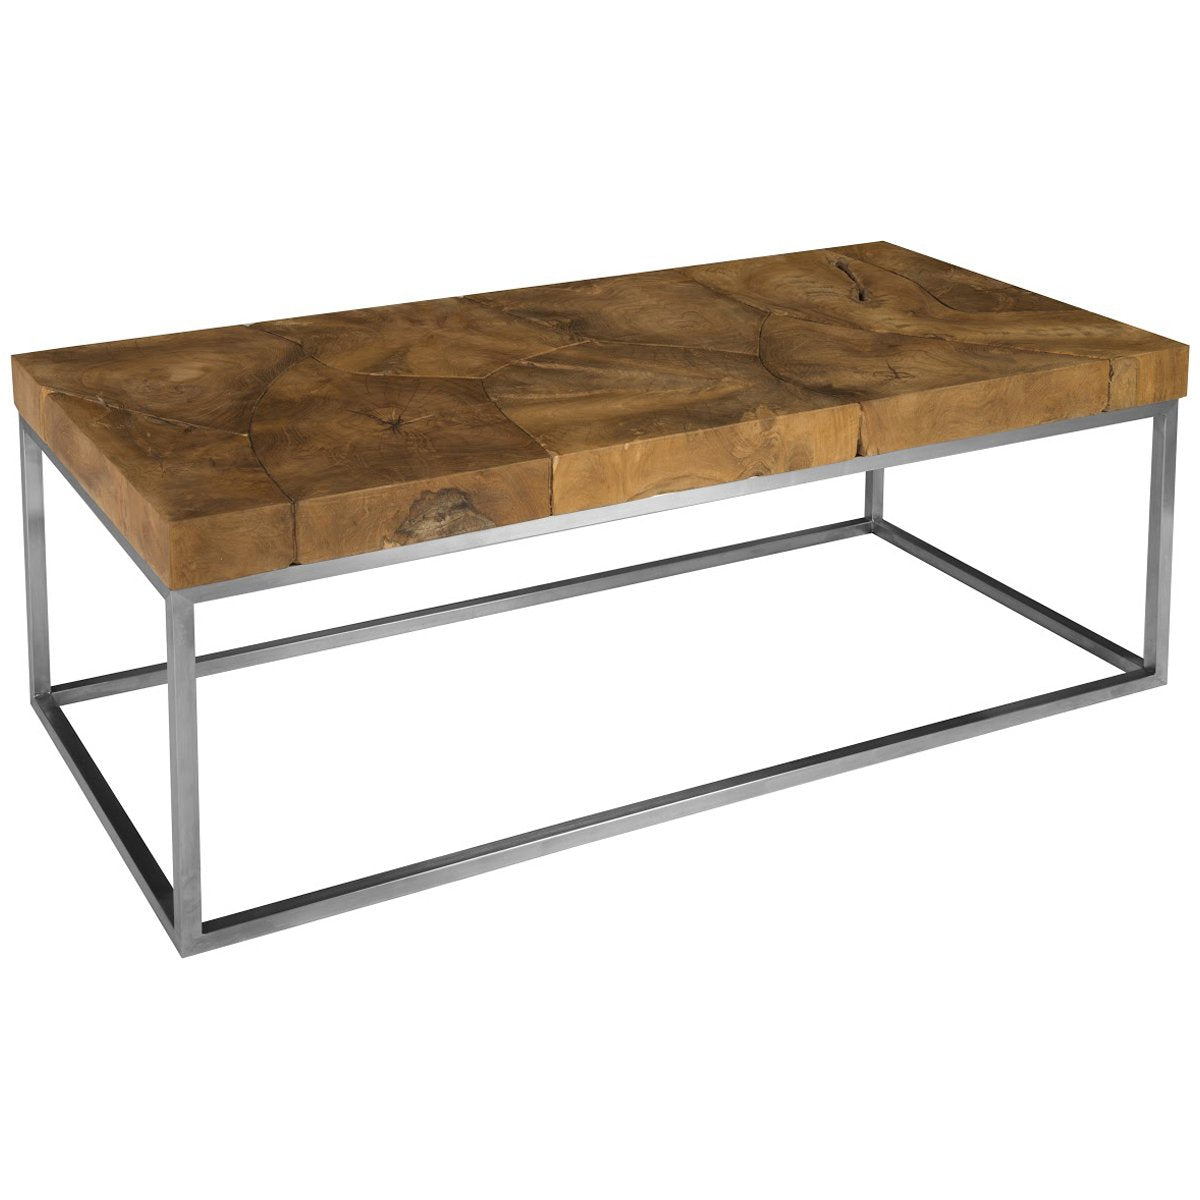 Phillips Collection Teak Puzzle Coffee Table, Rectangle